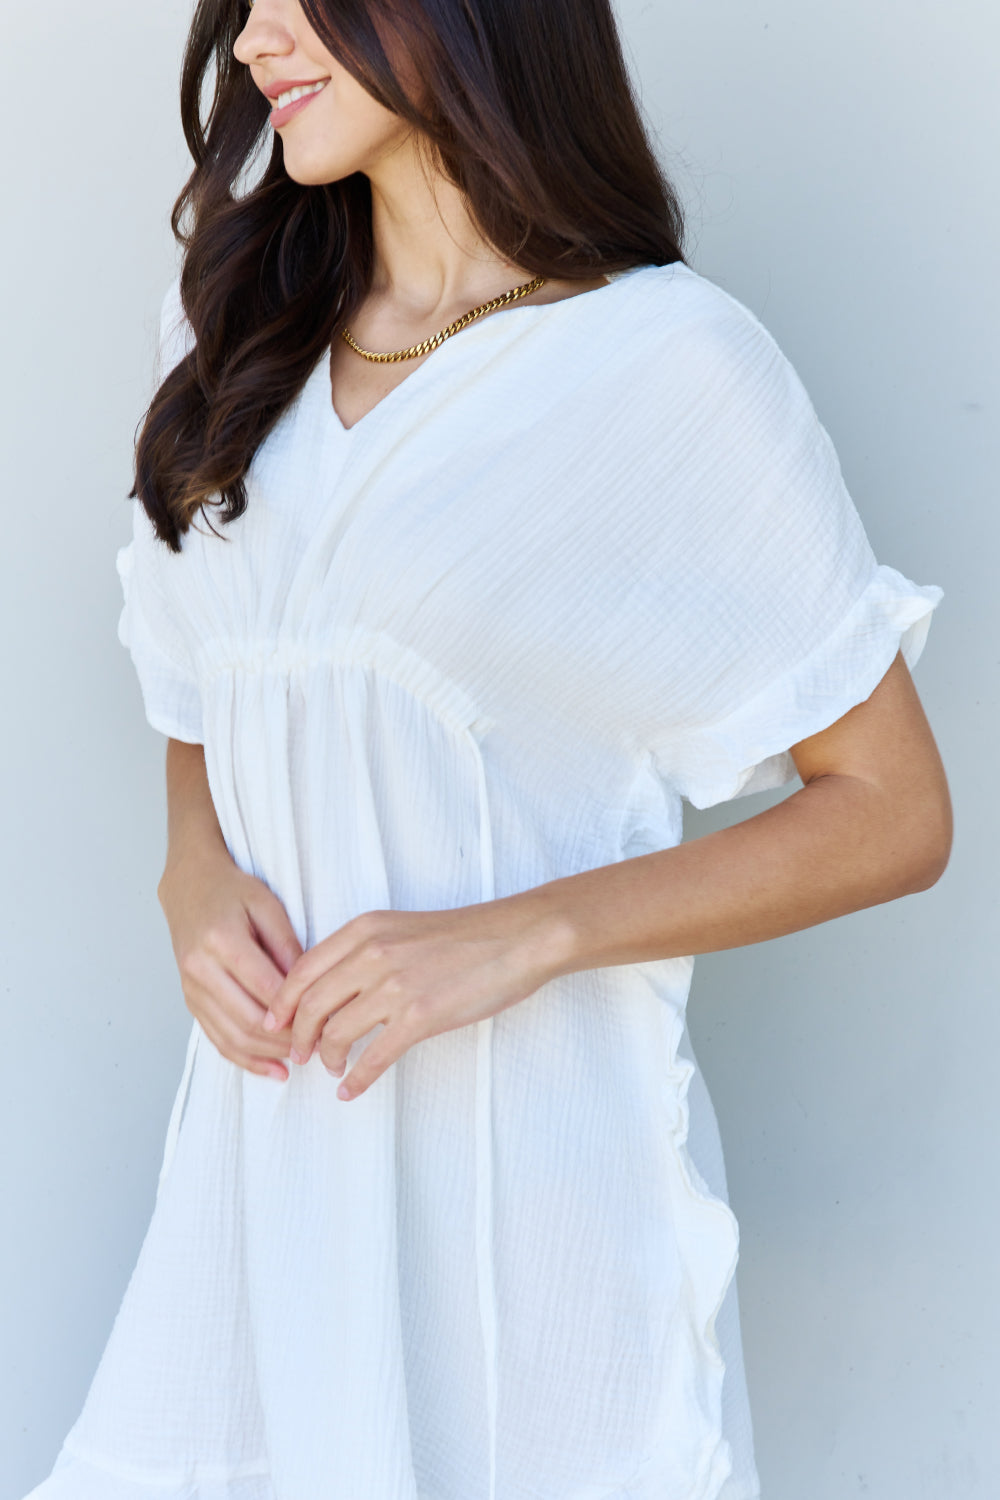 Ninexis Out Of Time Full Size Ruffle Hem Dress with Drawstring Waistband in White free shipping -Oh Em Gee Boutique